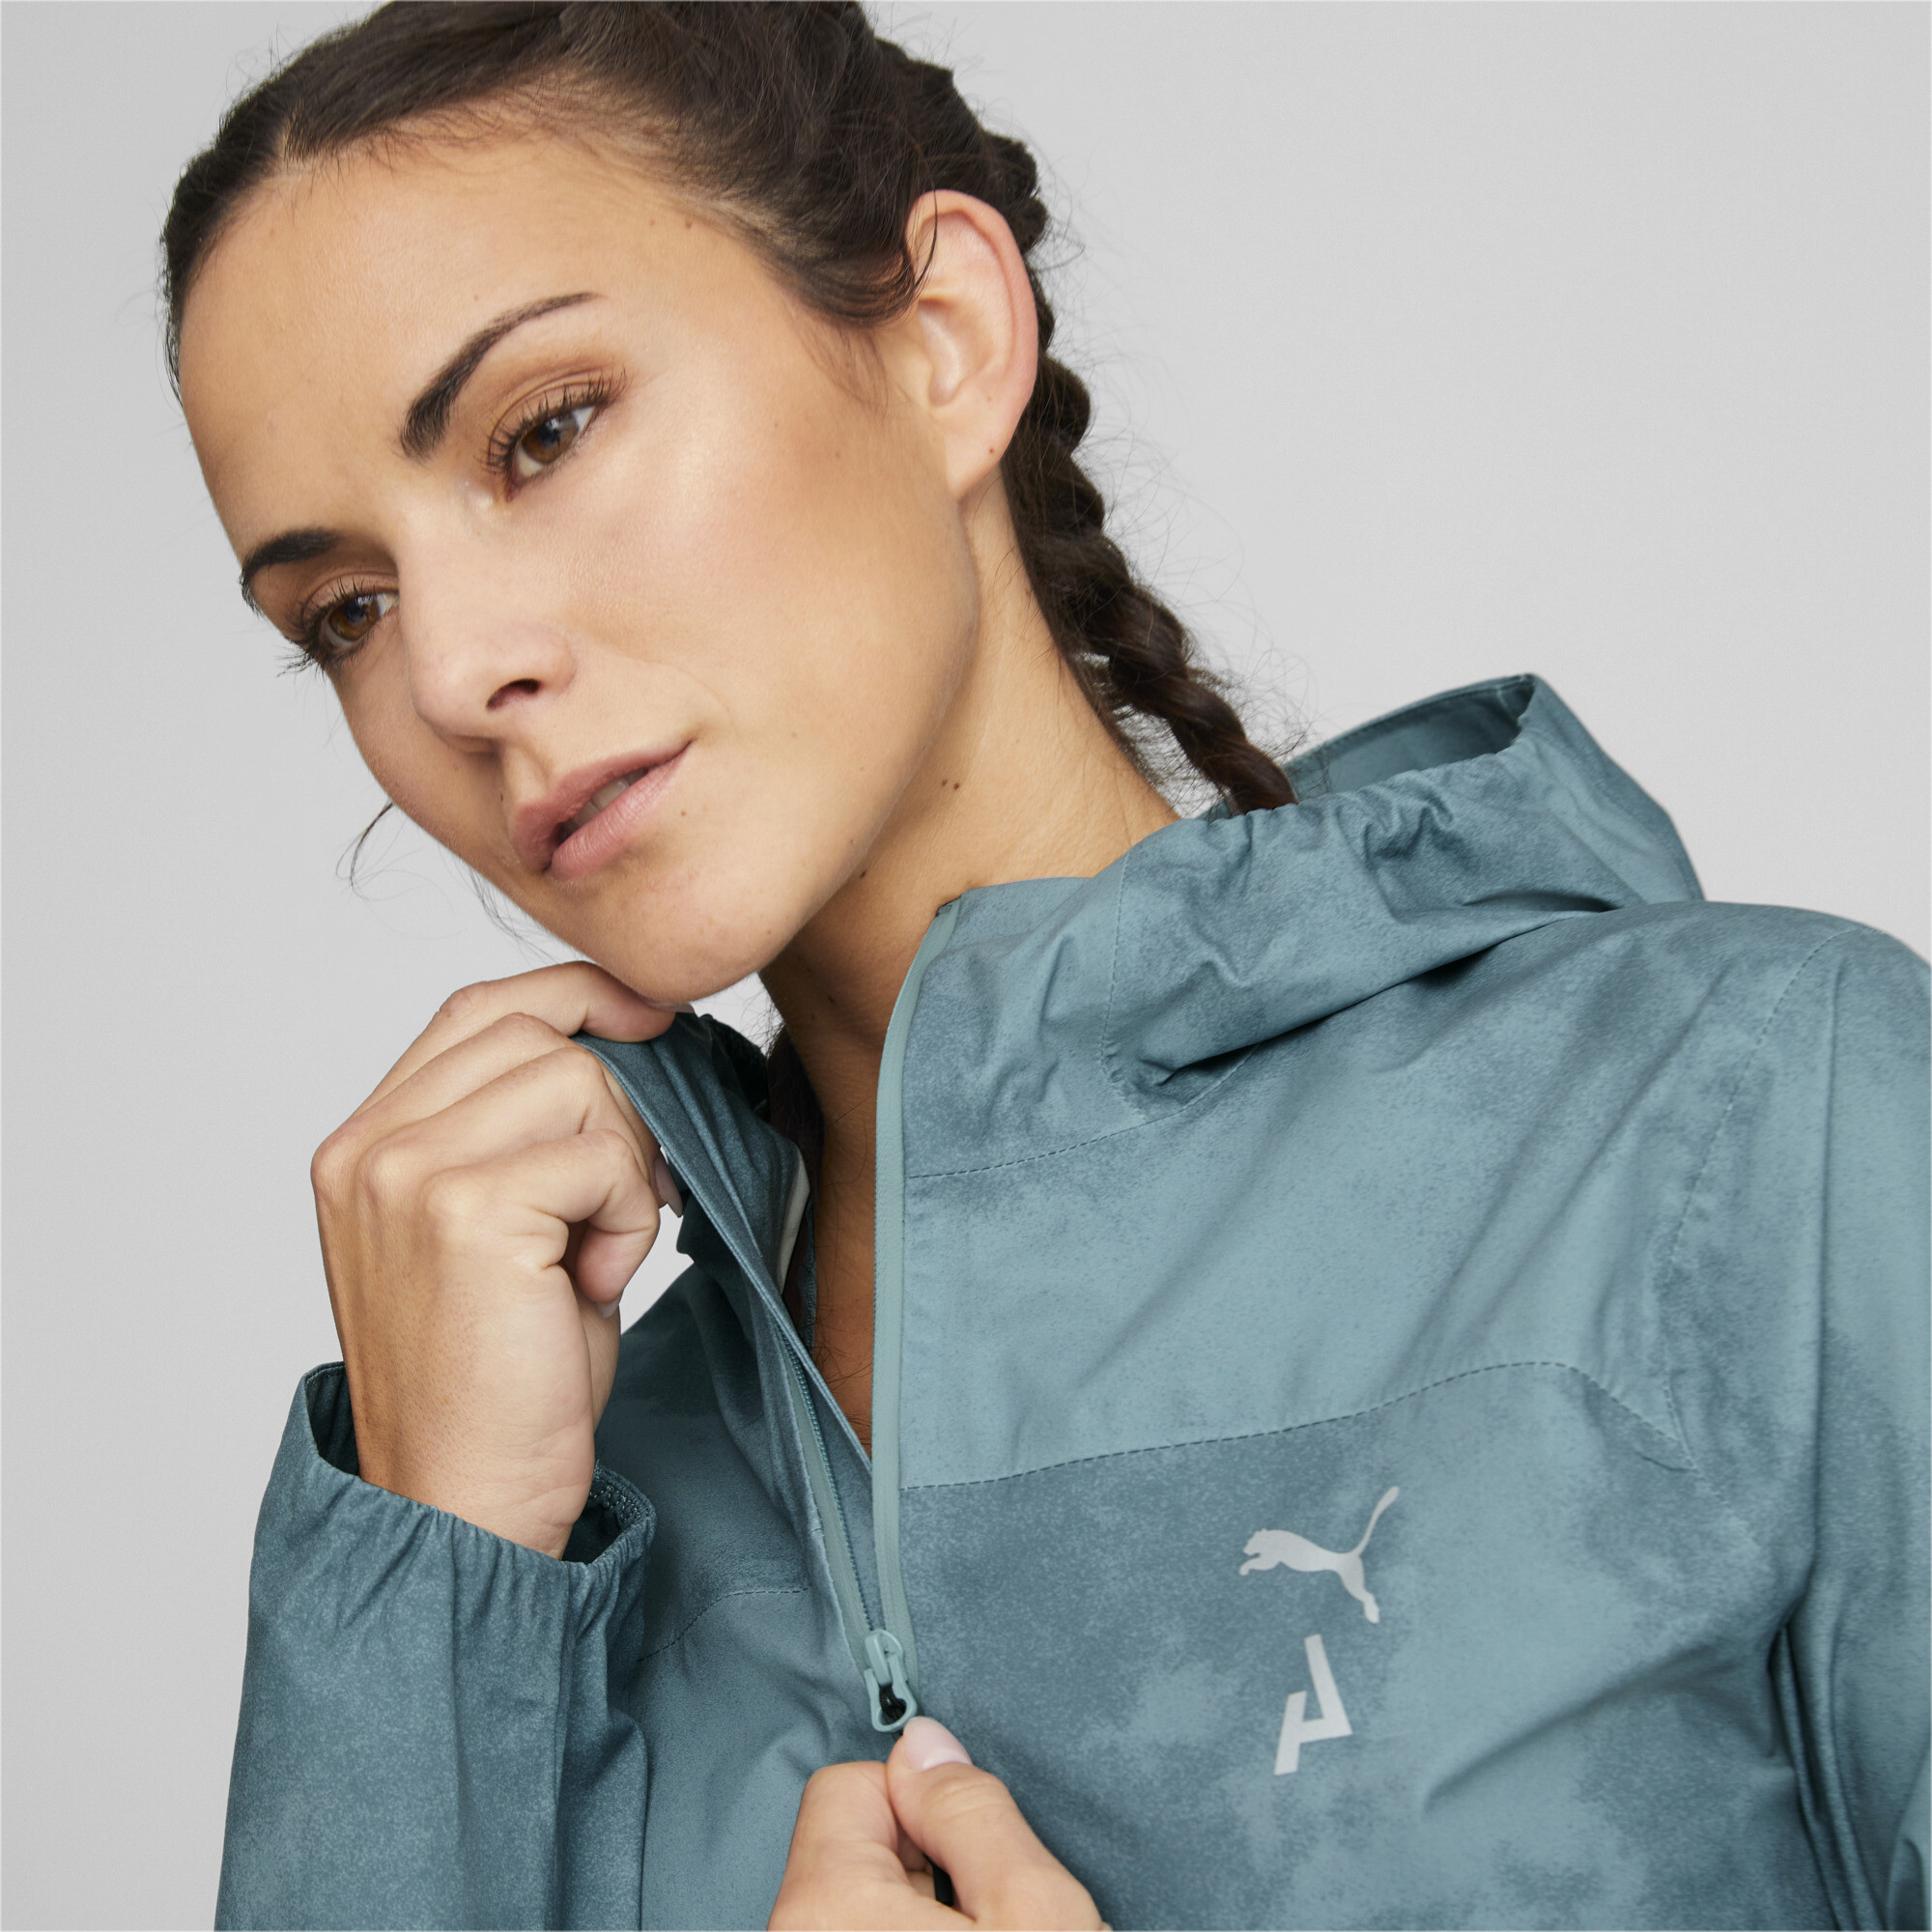 Women's Puma SEASONS Storm CELL Sympa TexÂ® Packable Trail Running Jacket, Gray, Size XL, Clothing